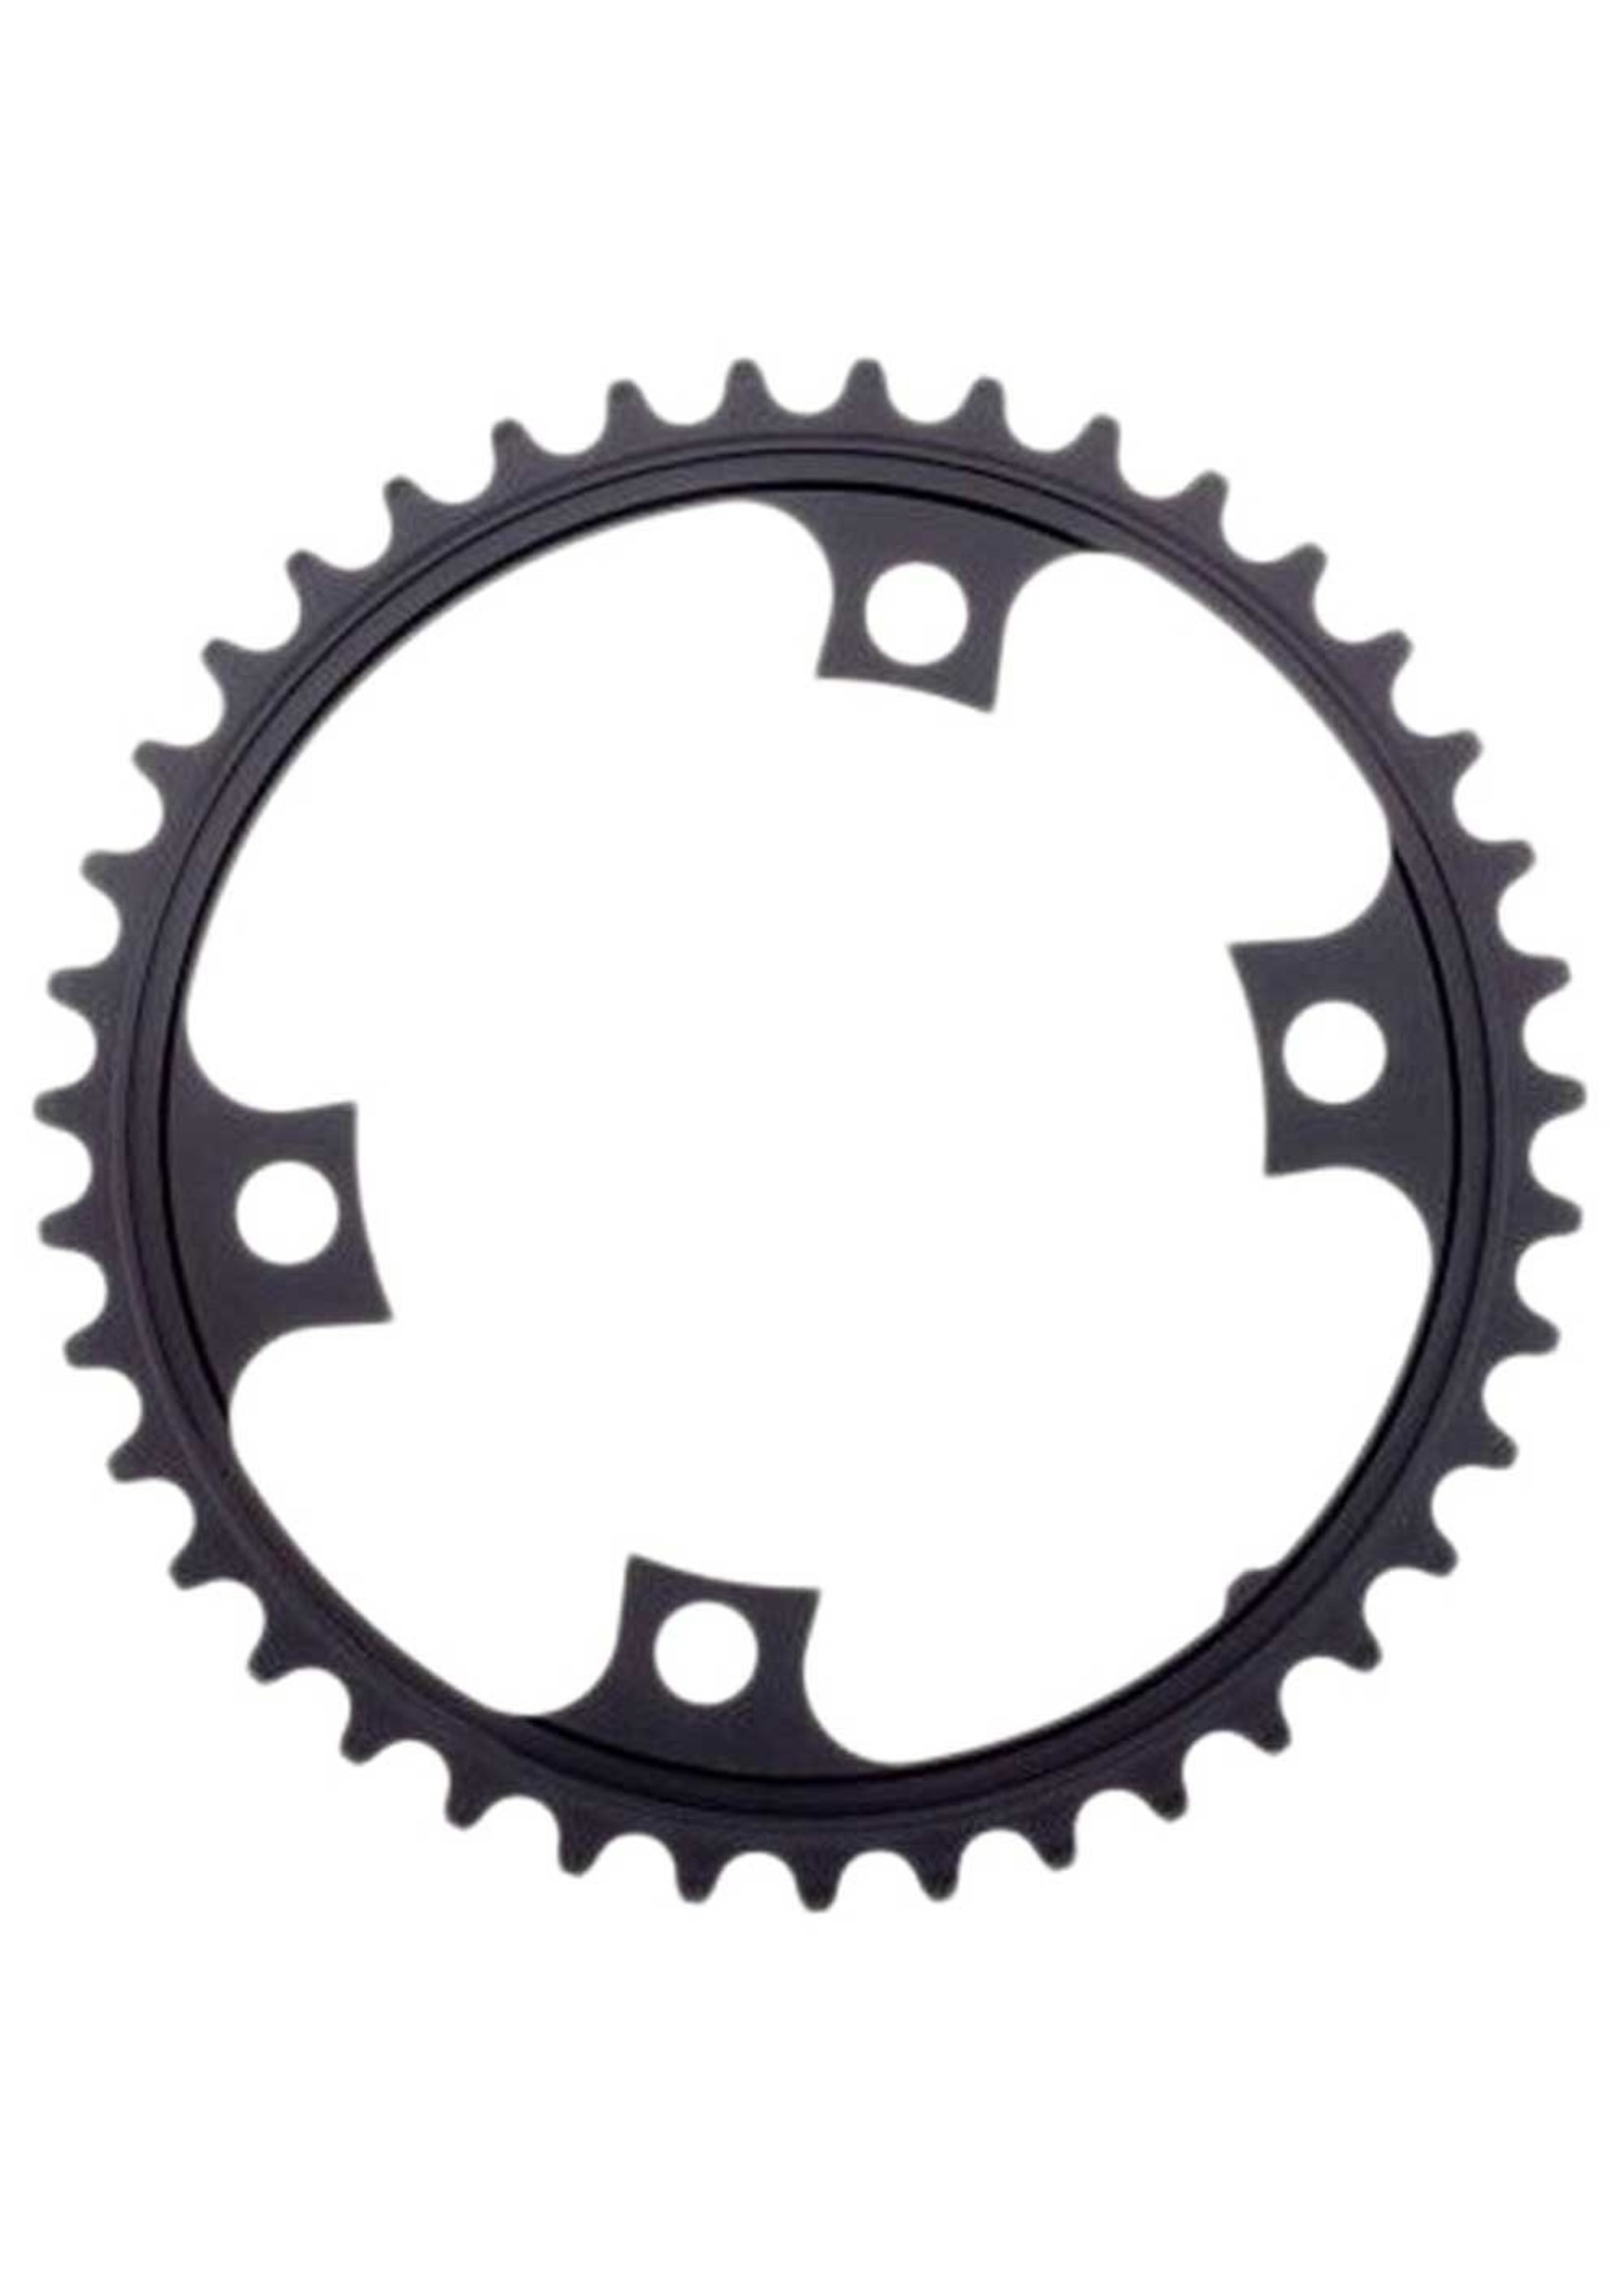 Shimano FC-6800 Chainring 39T-MD for 53-39T